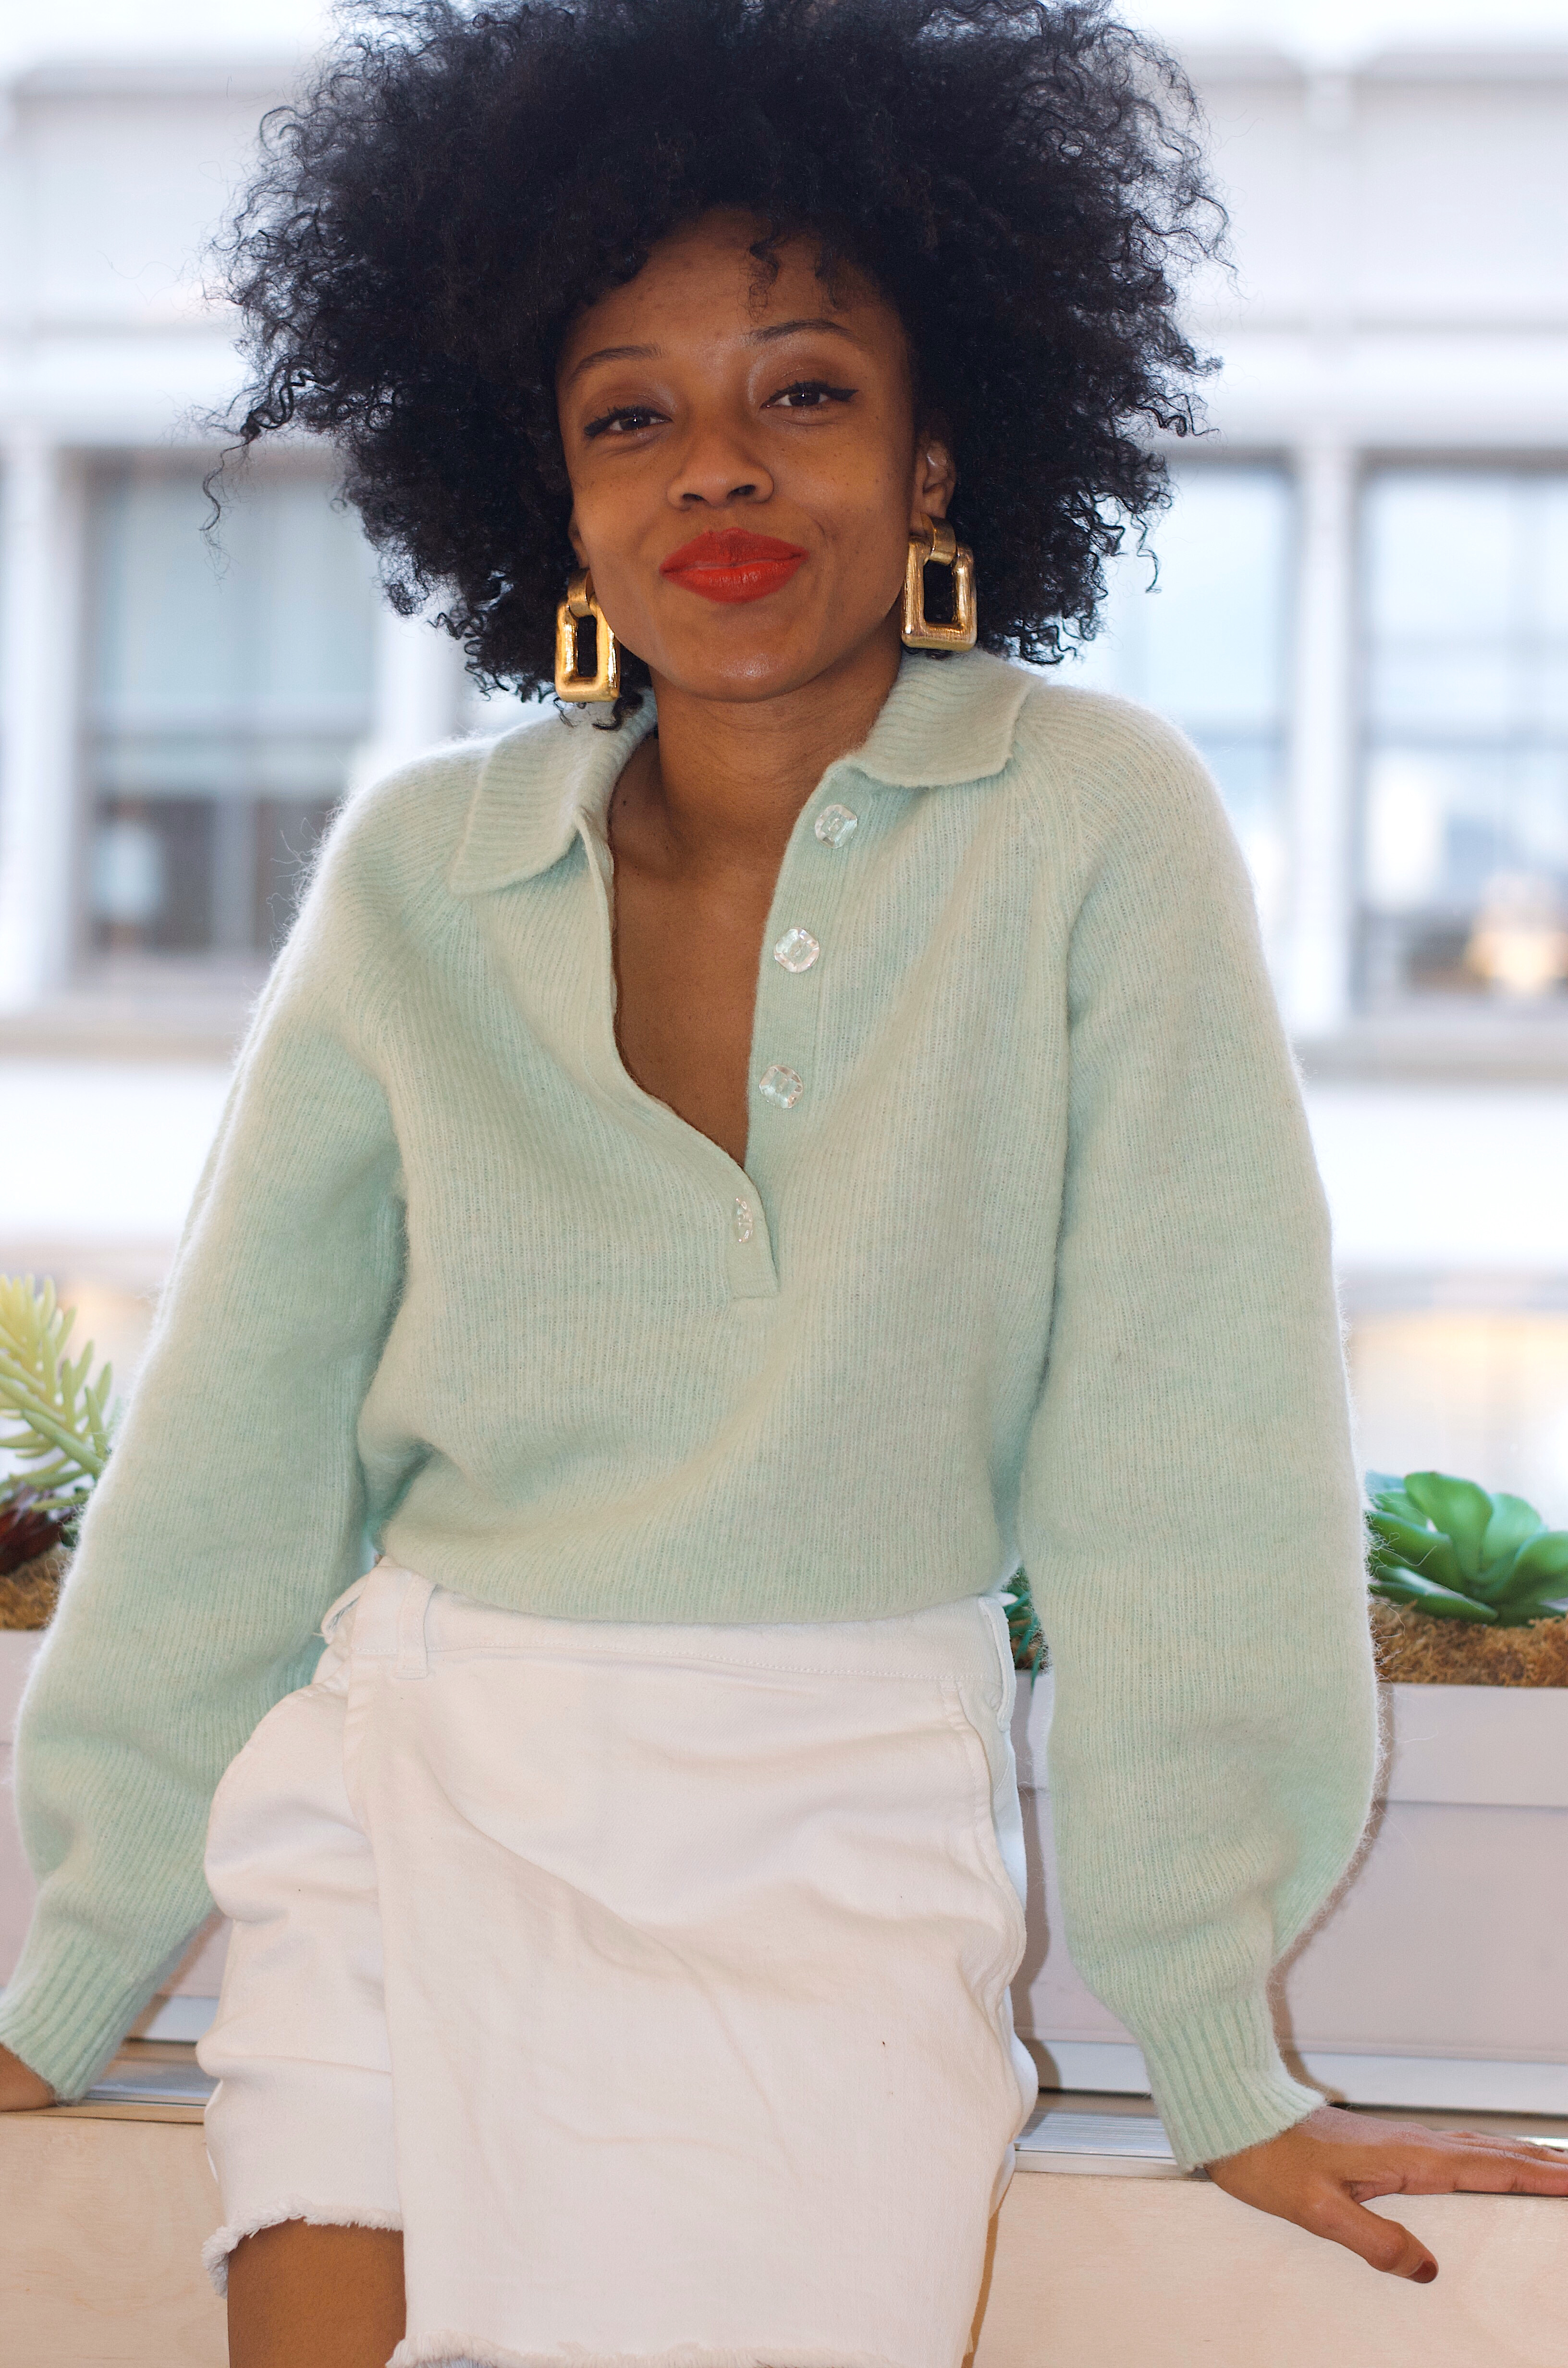 Fashion Blogger Kamara Williams shares her wellness tips on following the flow